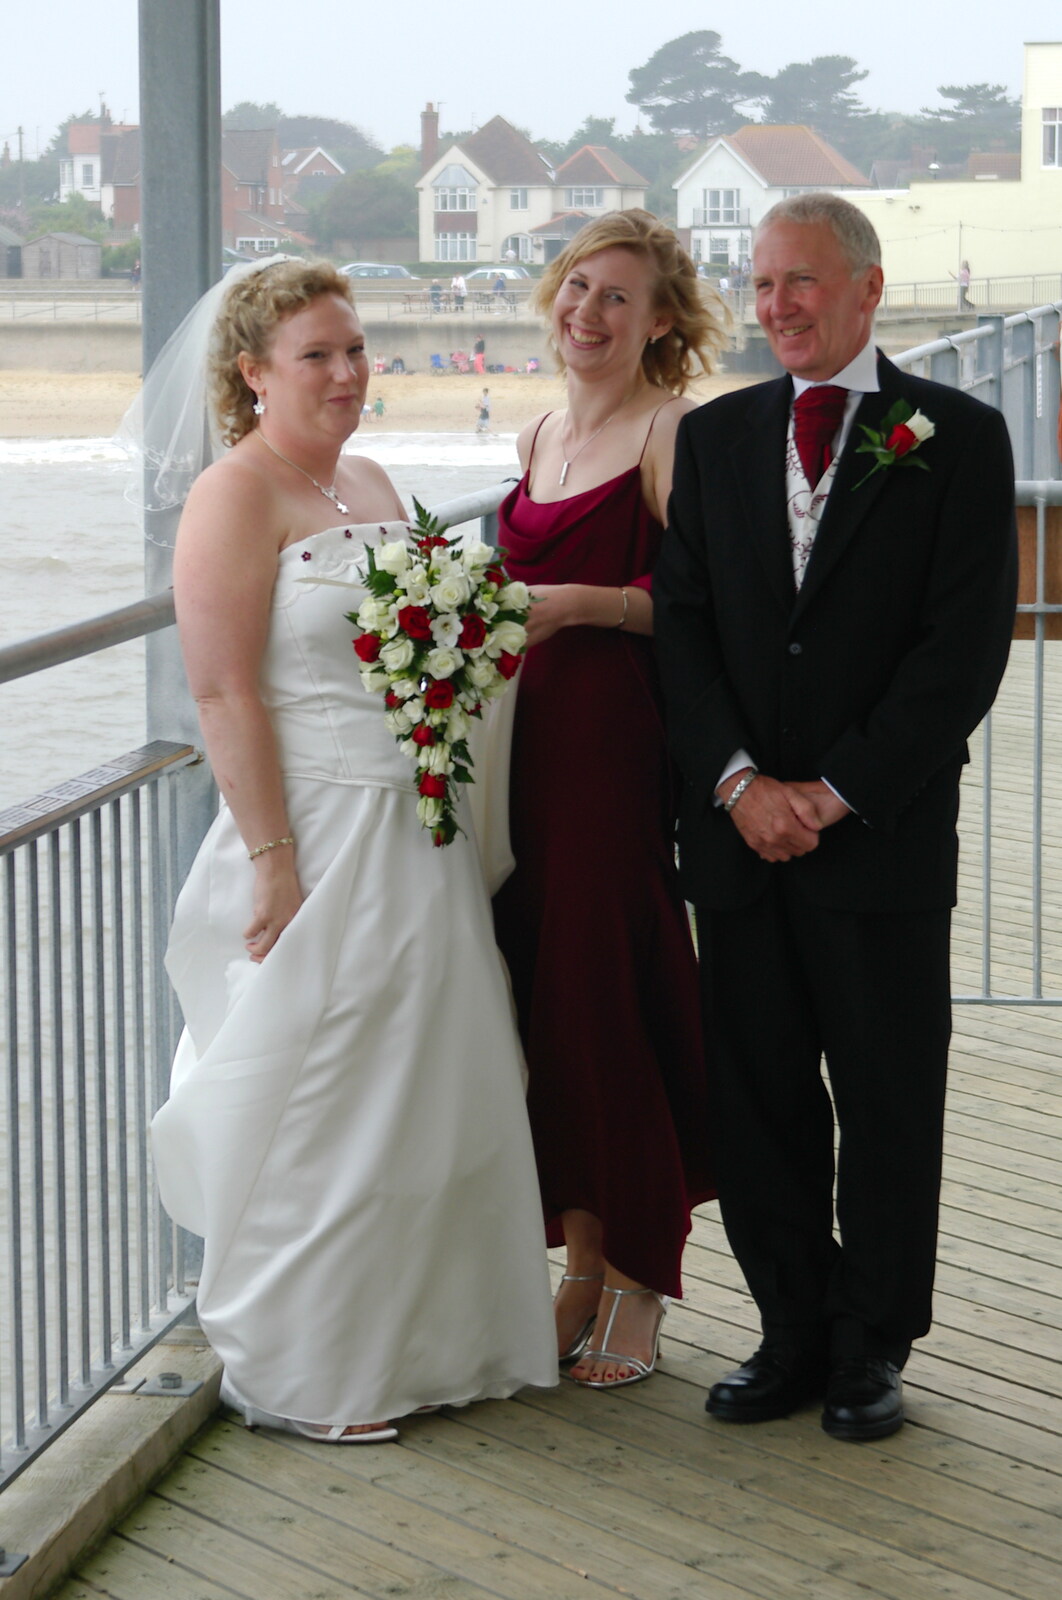 Sally pauses for a photo from Sally and Paul's Wedding on the Pier, Southwold, Suffolk - 3rd September 2005